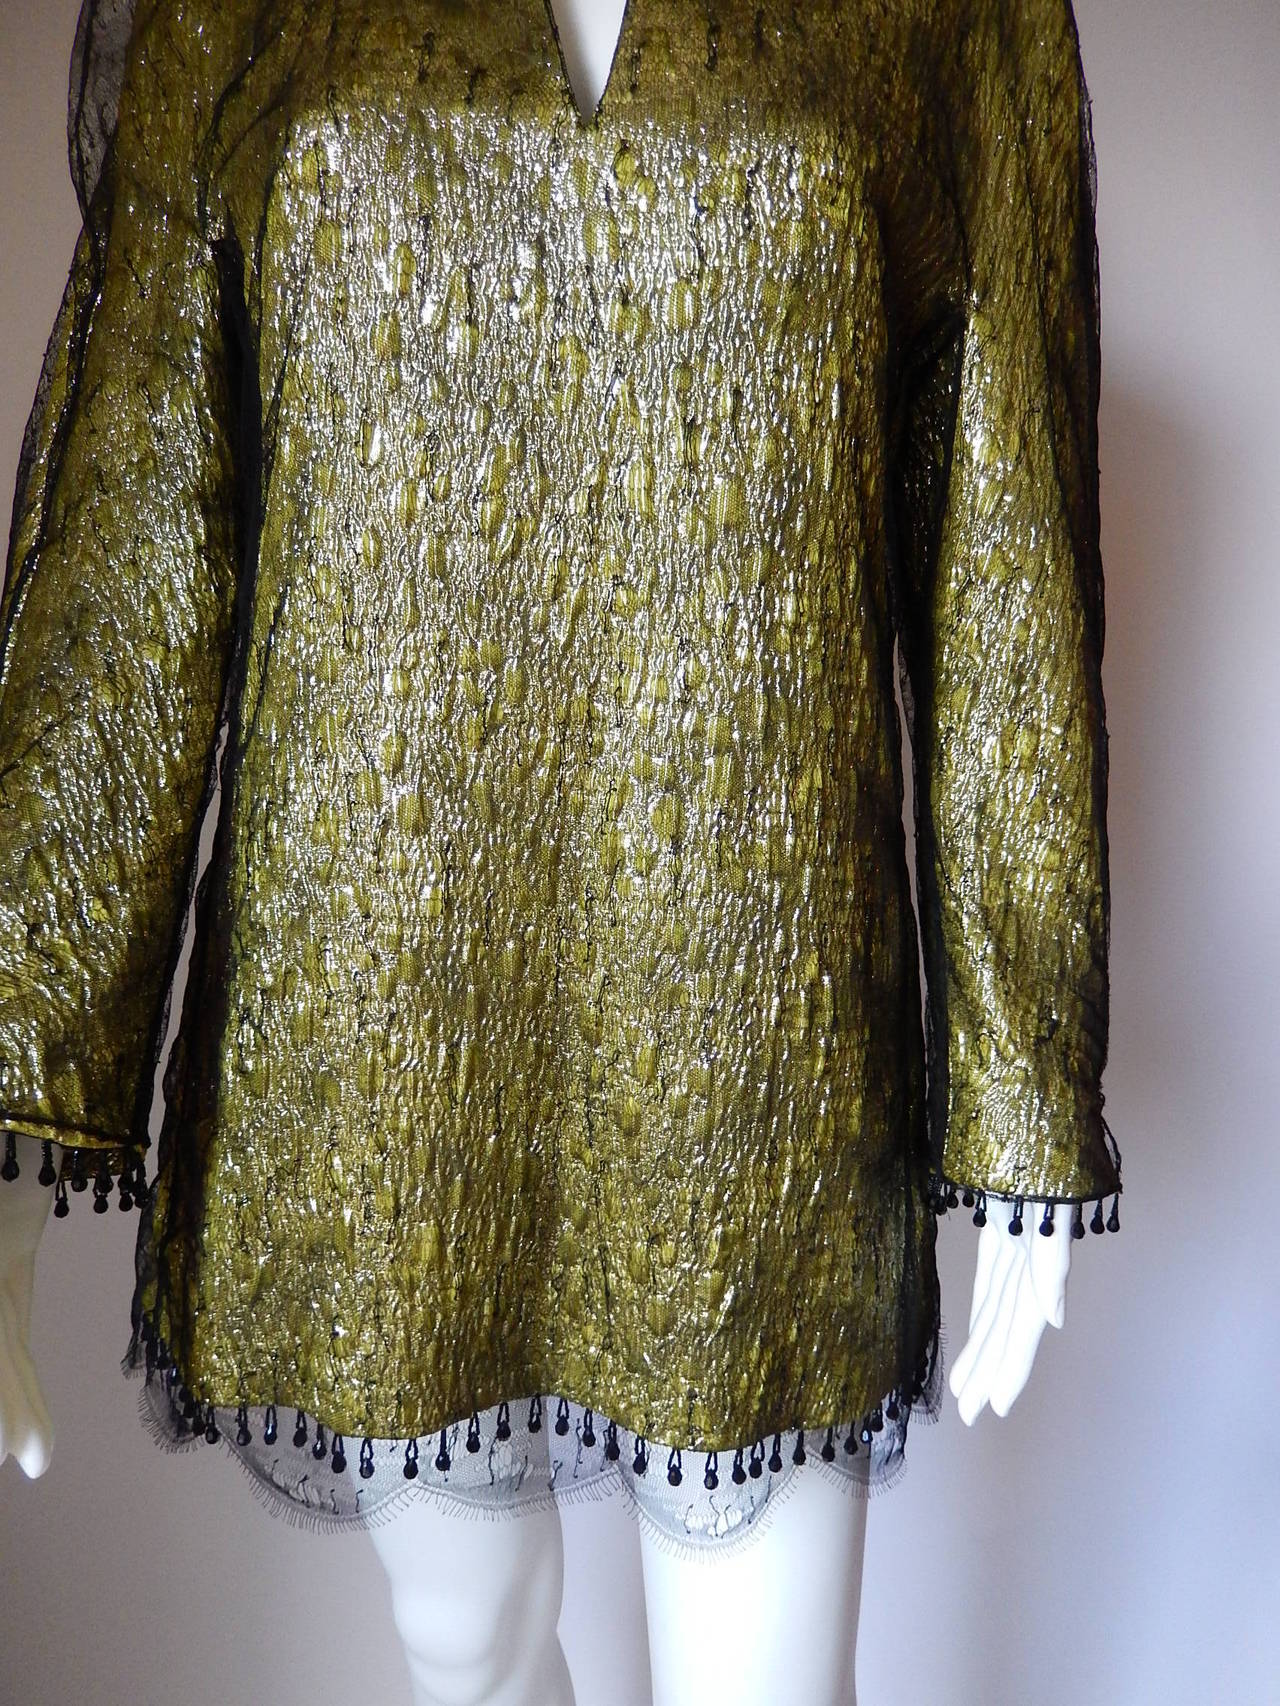 Stunning and one of a kind Chado Ralph Rucci Tunic.
Body is textured wool and silk in a green/gold color.  
Overlay is black lace with stitching details all over it.
Hanging from cuffs and hem, are black crystal polygon beads which are hanging